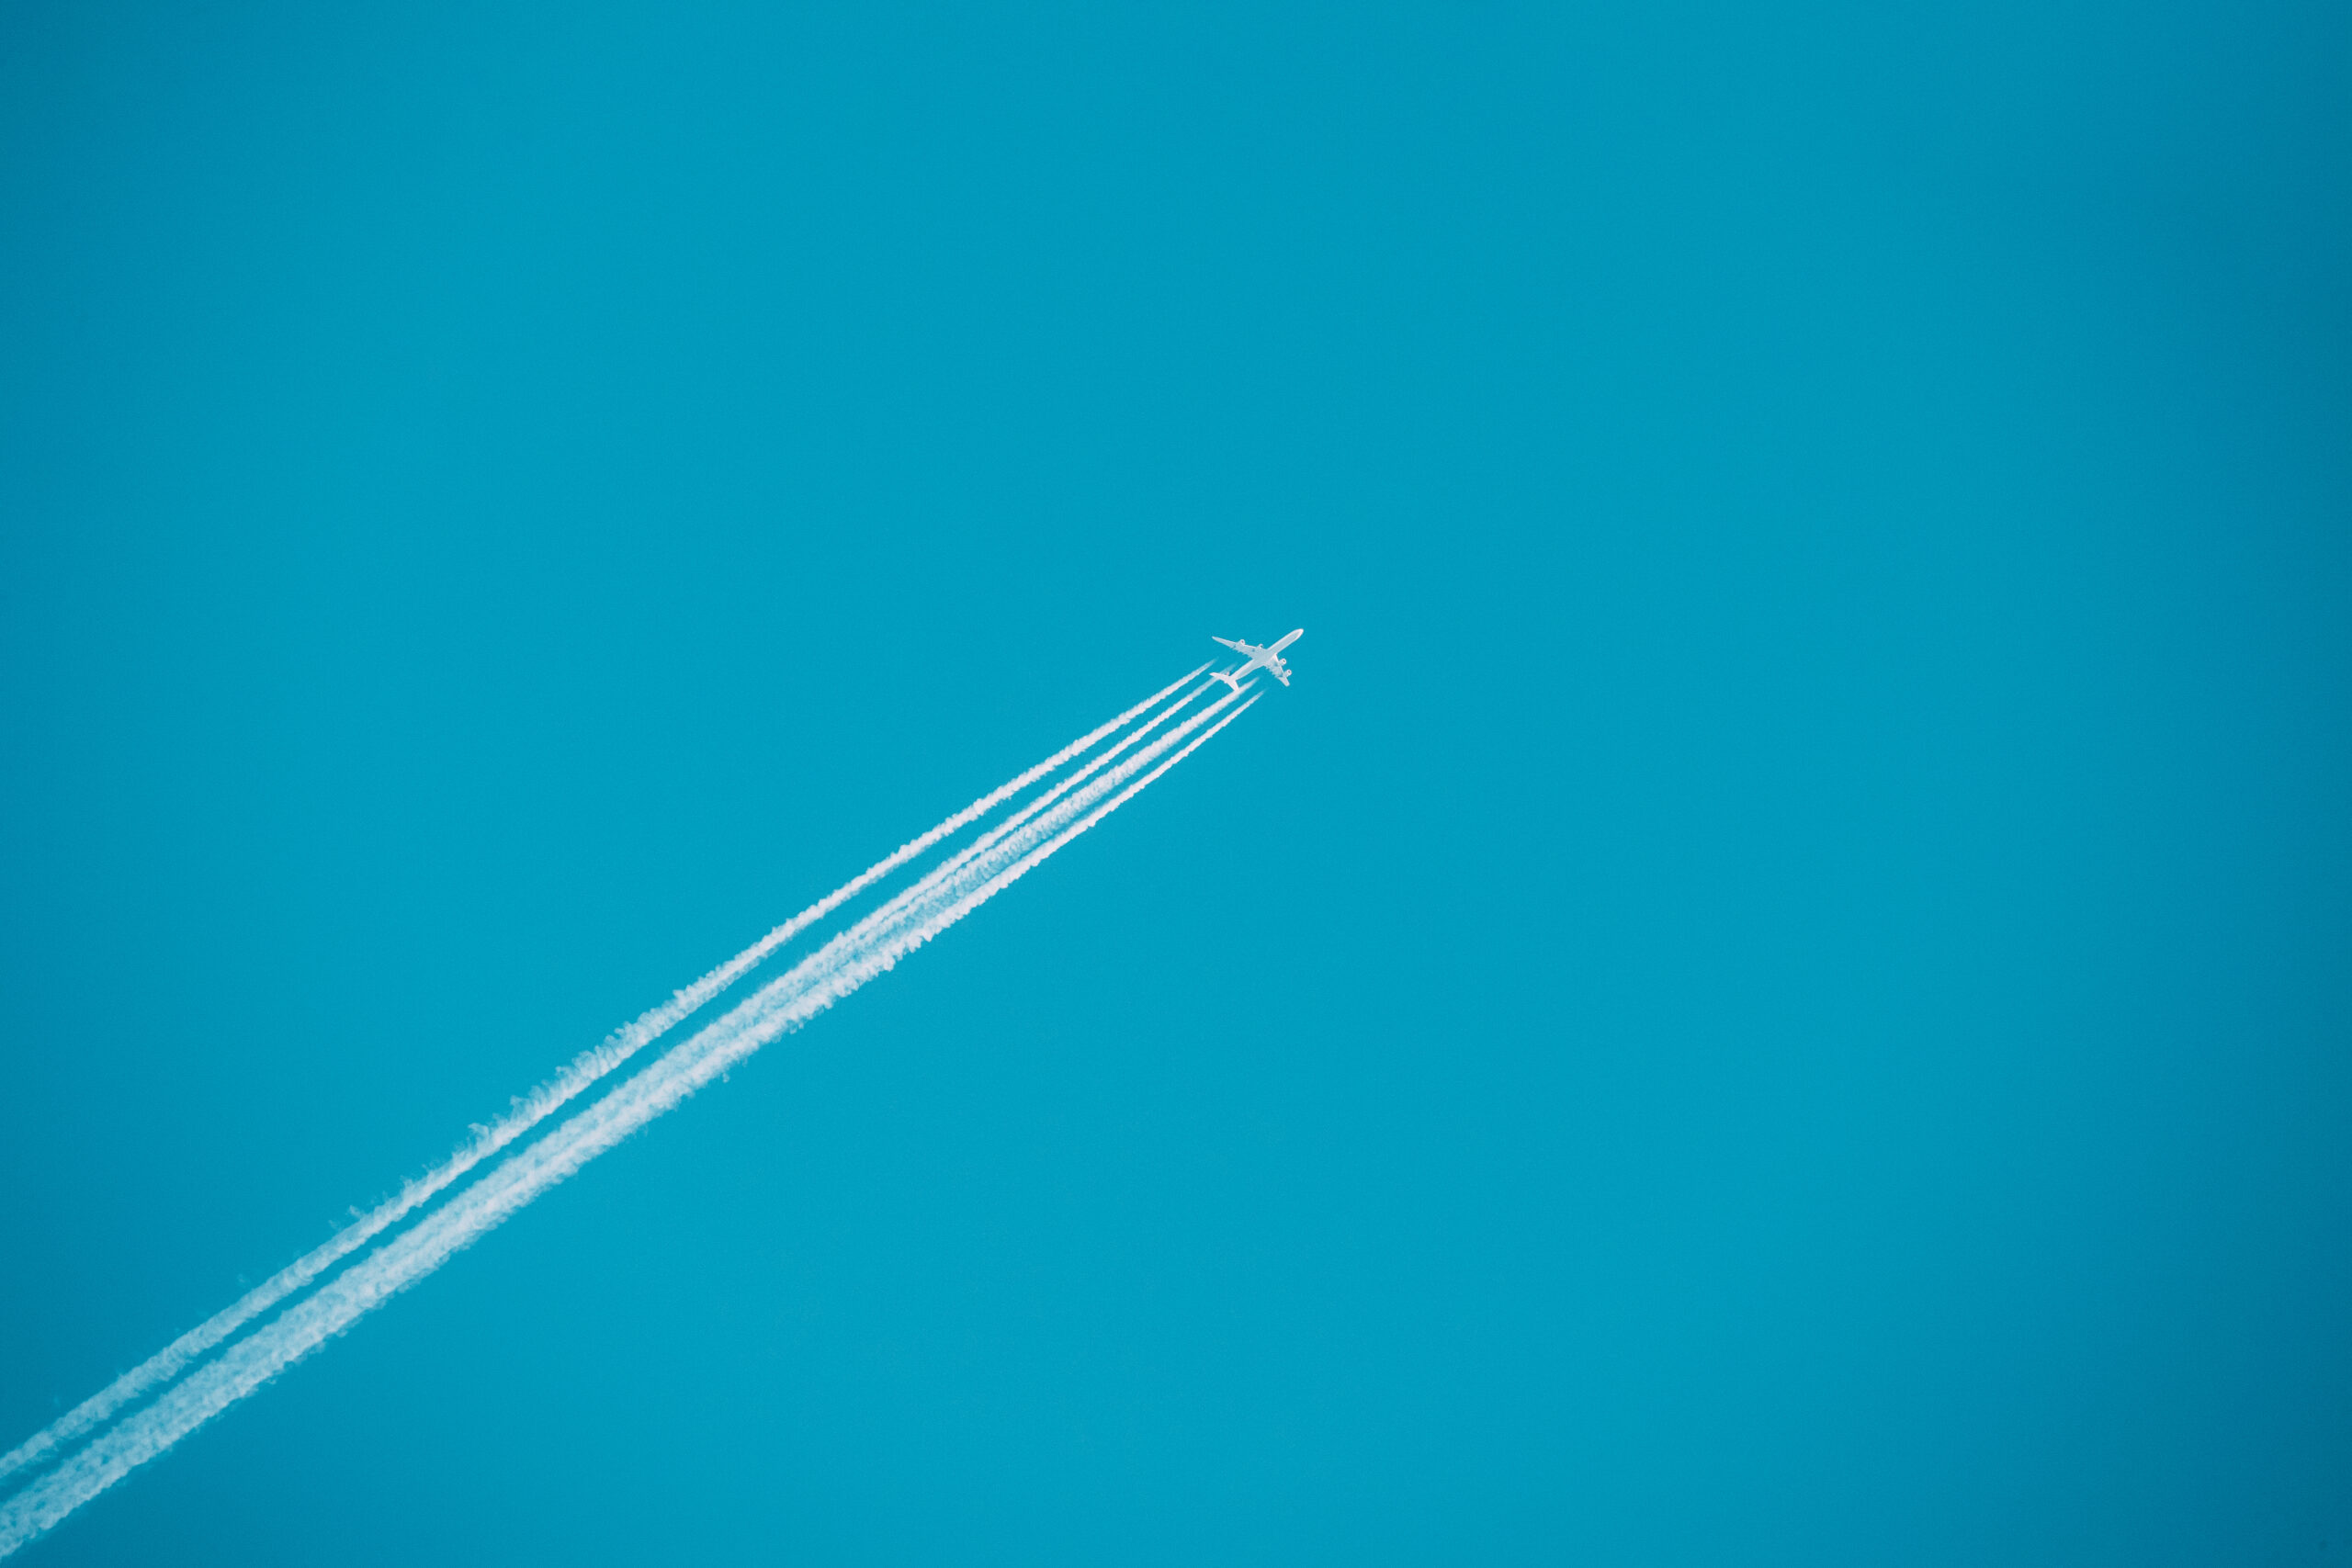 Contrail In Blue Sky. Plane, Clear Sunny Sky Background. Airplane Aircraft In Sky With Plane Trails